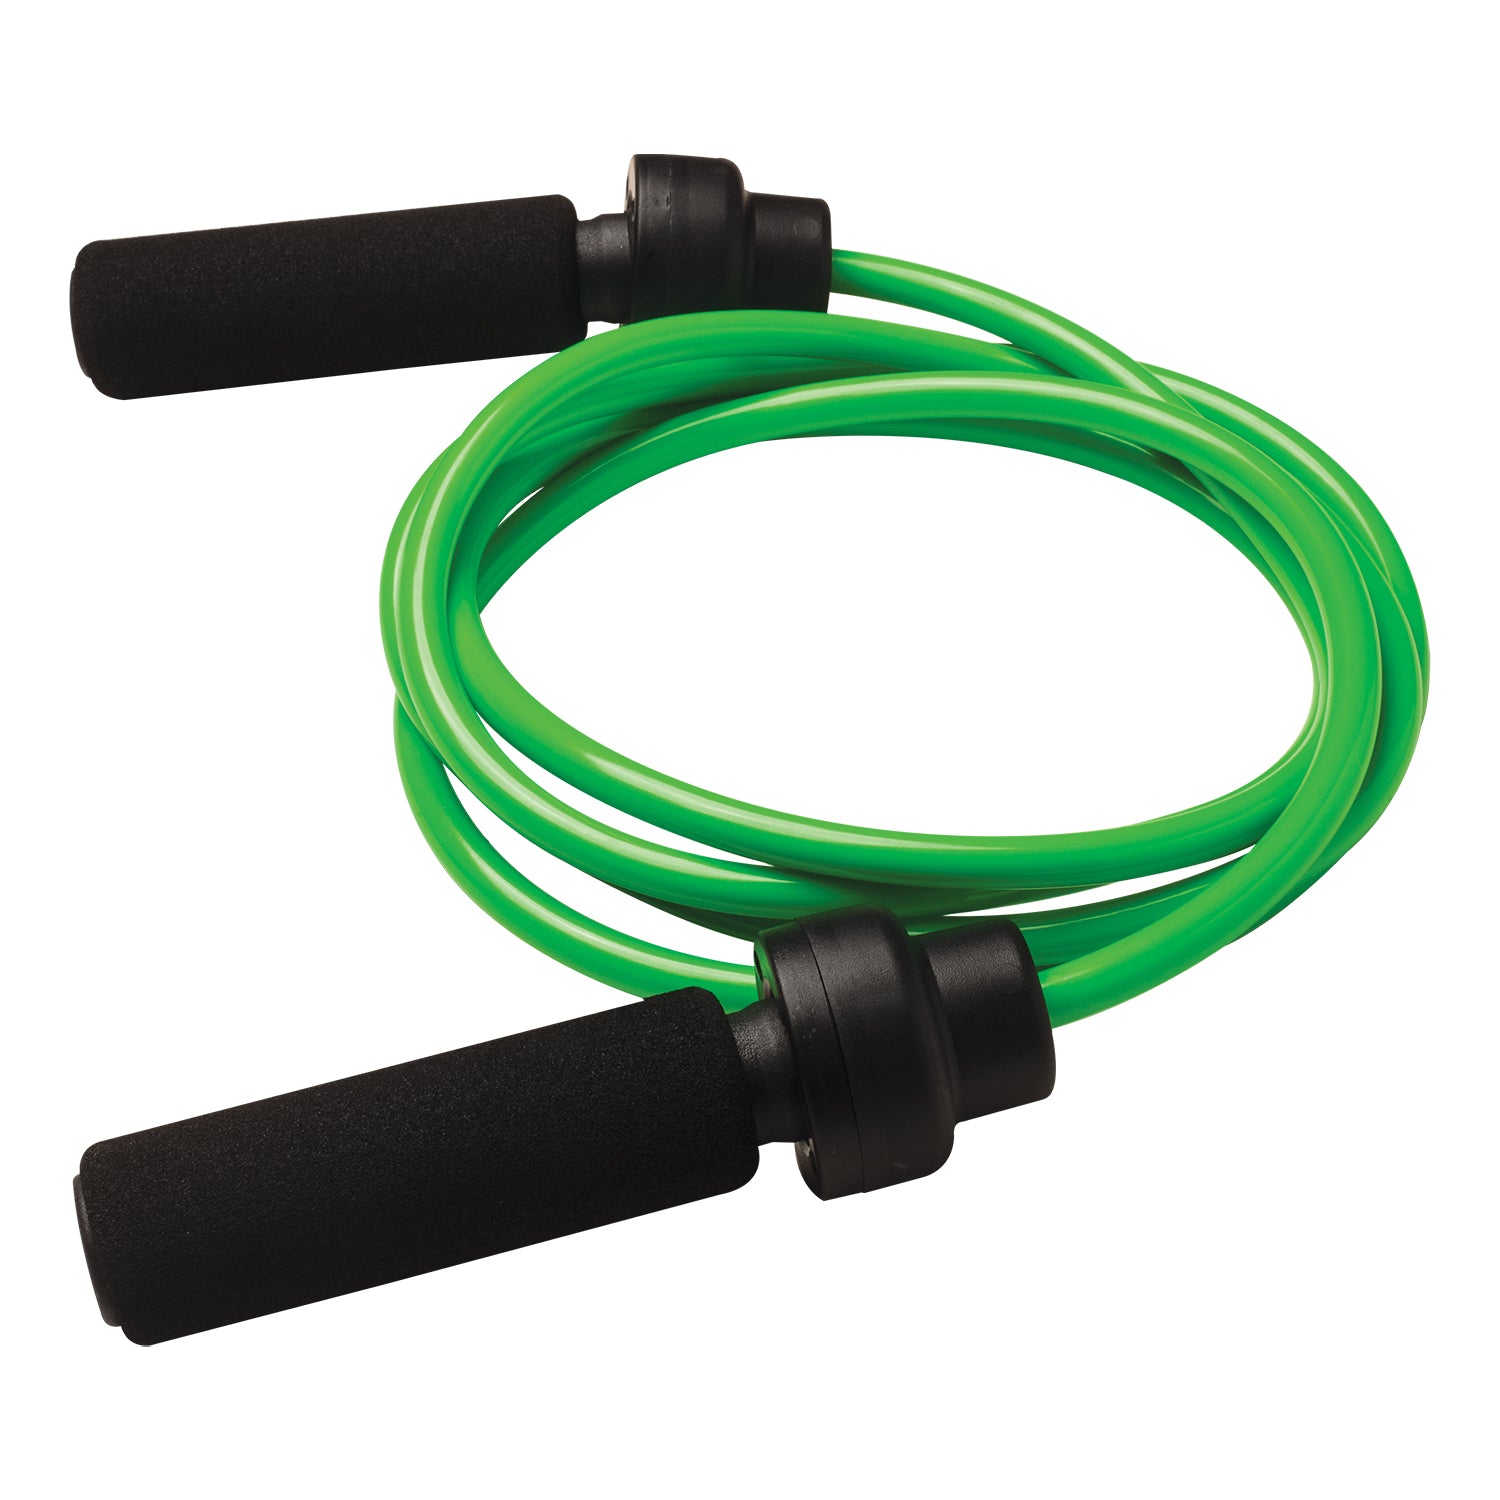 Weighted Jump Rope Series 1 lb, Green RHINO Fitness fitness Jump Rope